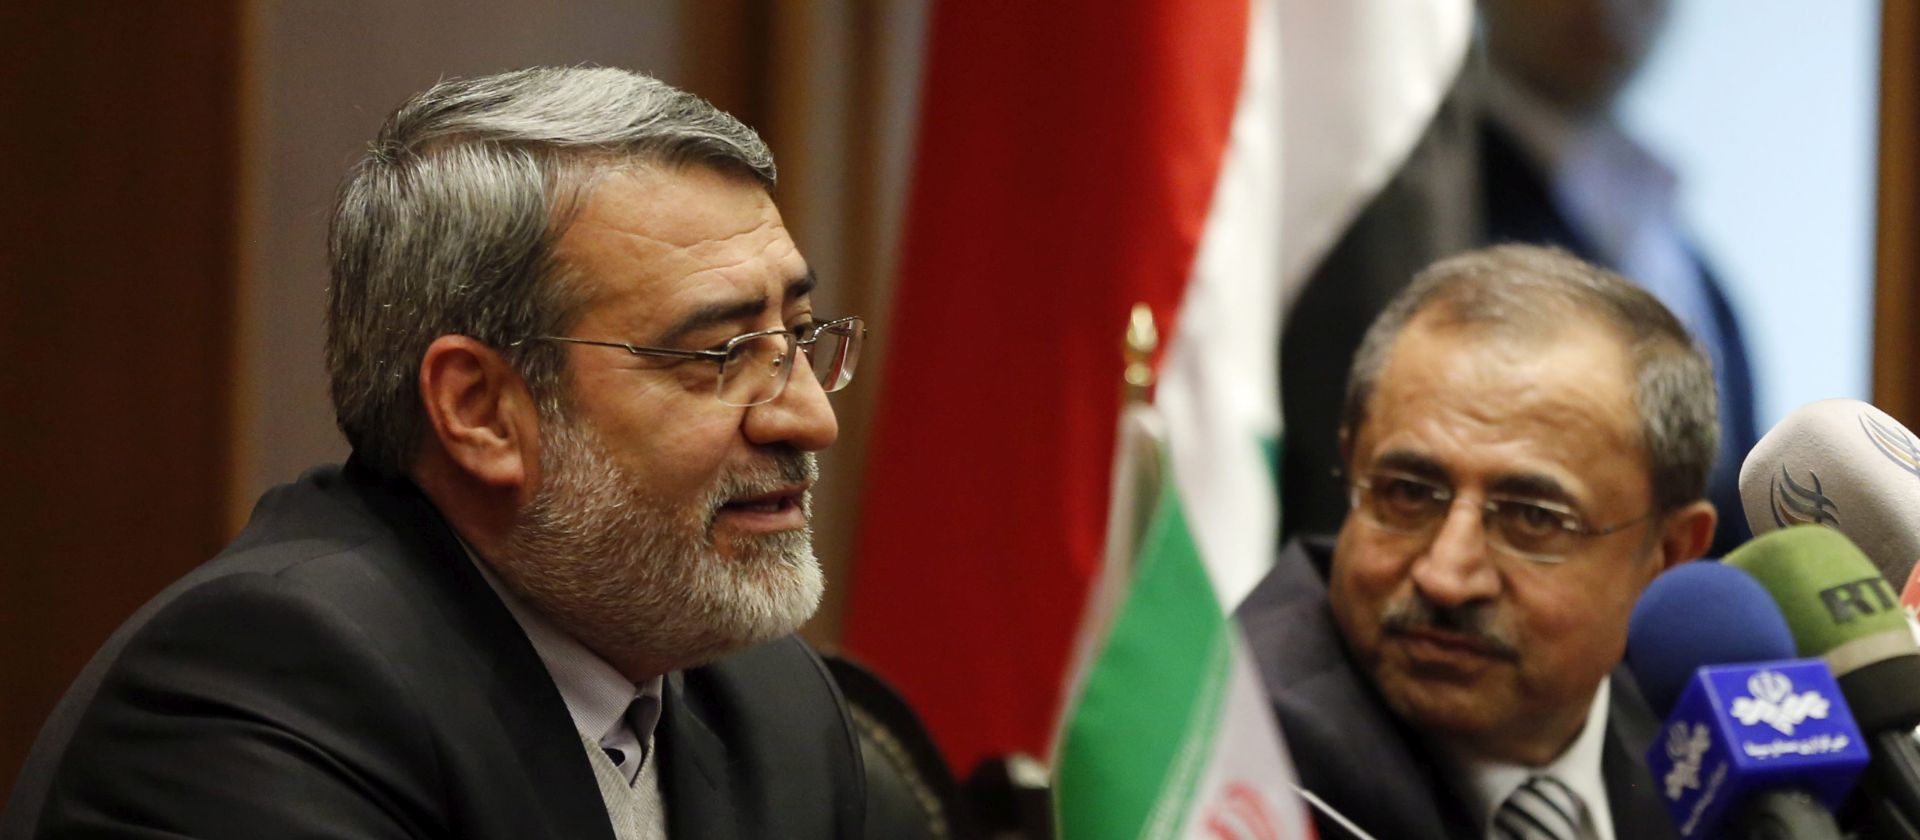 epa05096980 Iranian Minister of Interior Abdolreza Rahmani Fazli (L) speaks during a press conference with his Syrian counterpart Mohammad al-Shaar (R) in Damascus, Syria, 11 January 2016. According to reports, Fazli is on a two-day official visit to Syria where he will discuss ways of improving bilateral relations and implementing agreement signed between the two countries to counter terrorism and organized crimes.  EPA/YOUSSEF BADAWI